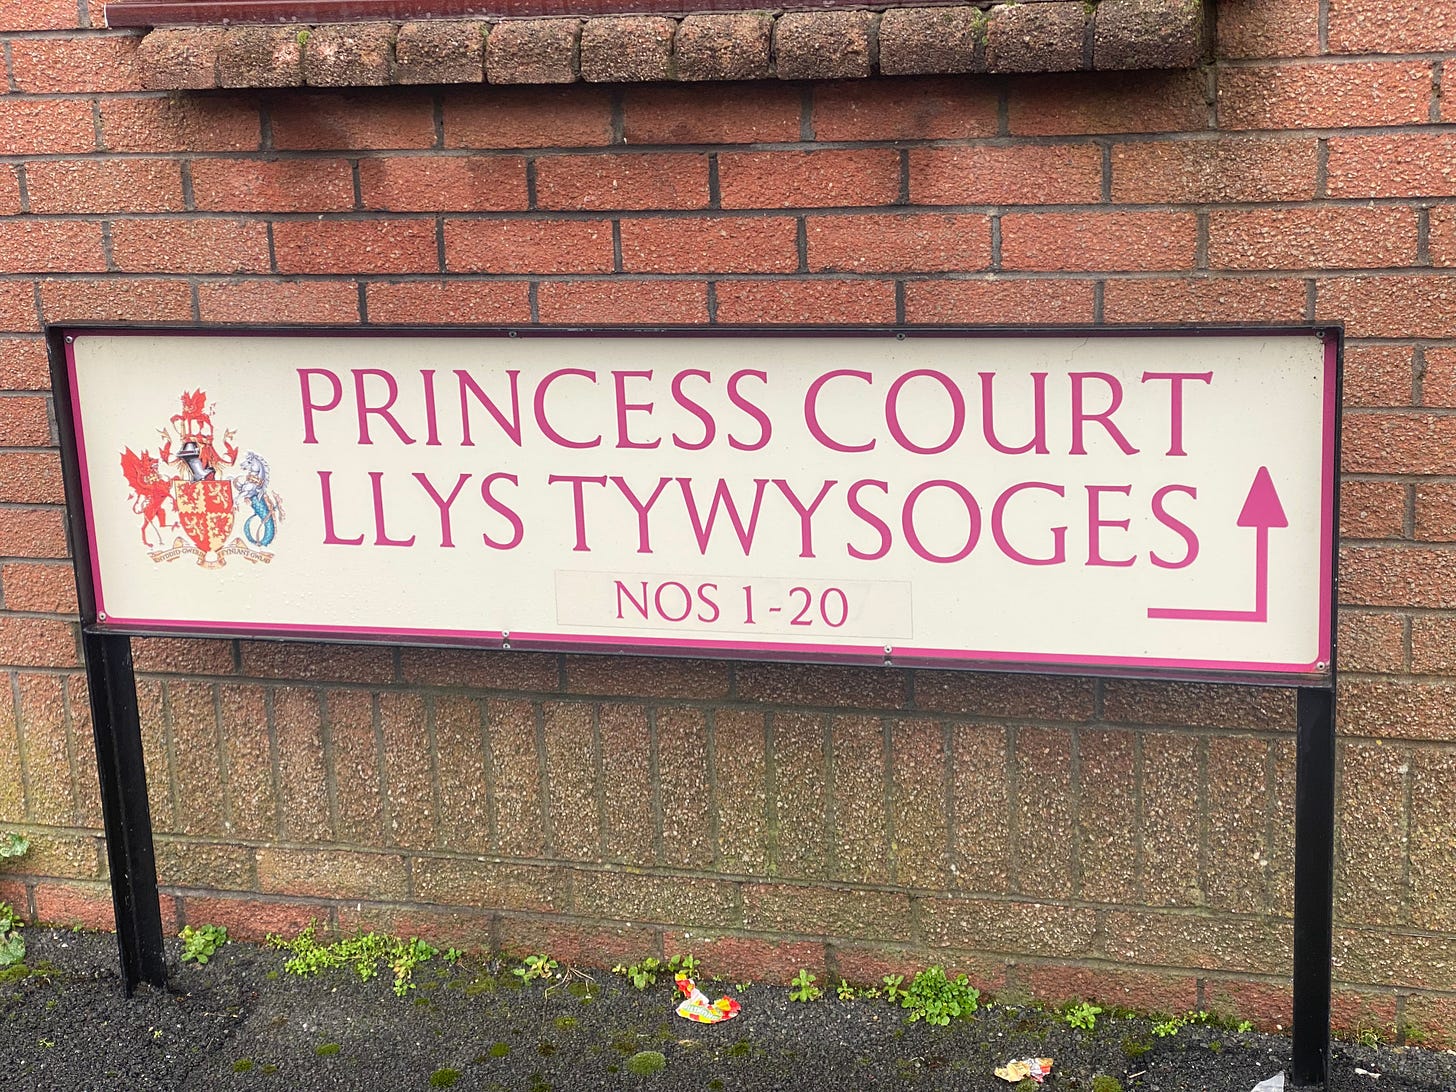 A bilingual street sign (like the first one in this article it carries the town crest as well as the names, but this time the English is first: 'Princess Court' with the Welsh "Llys Tywysoges' beneath.